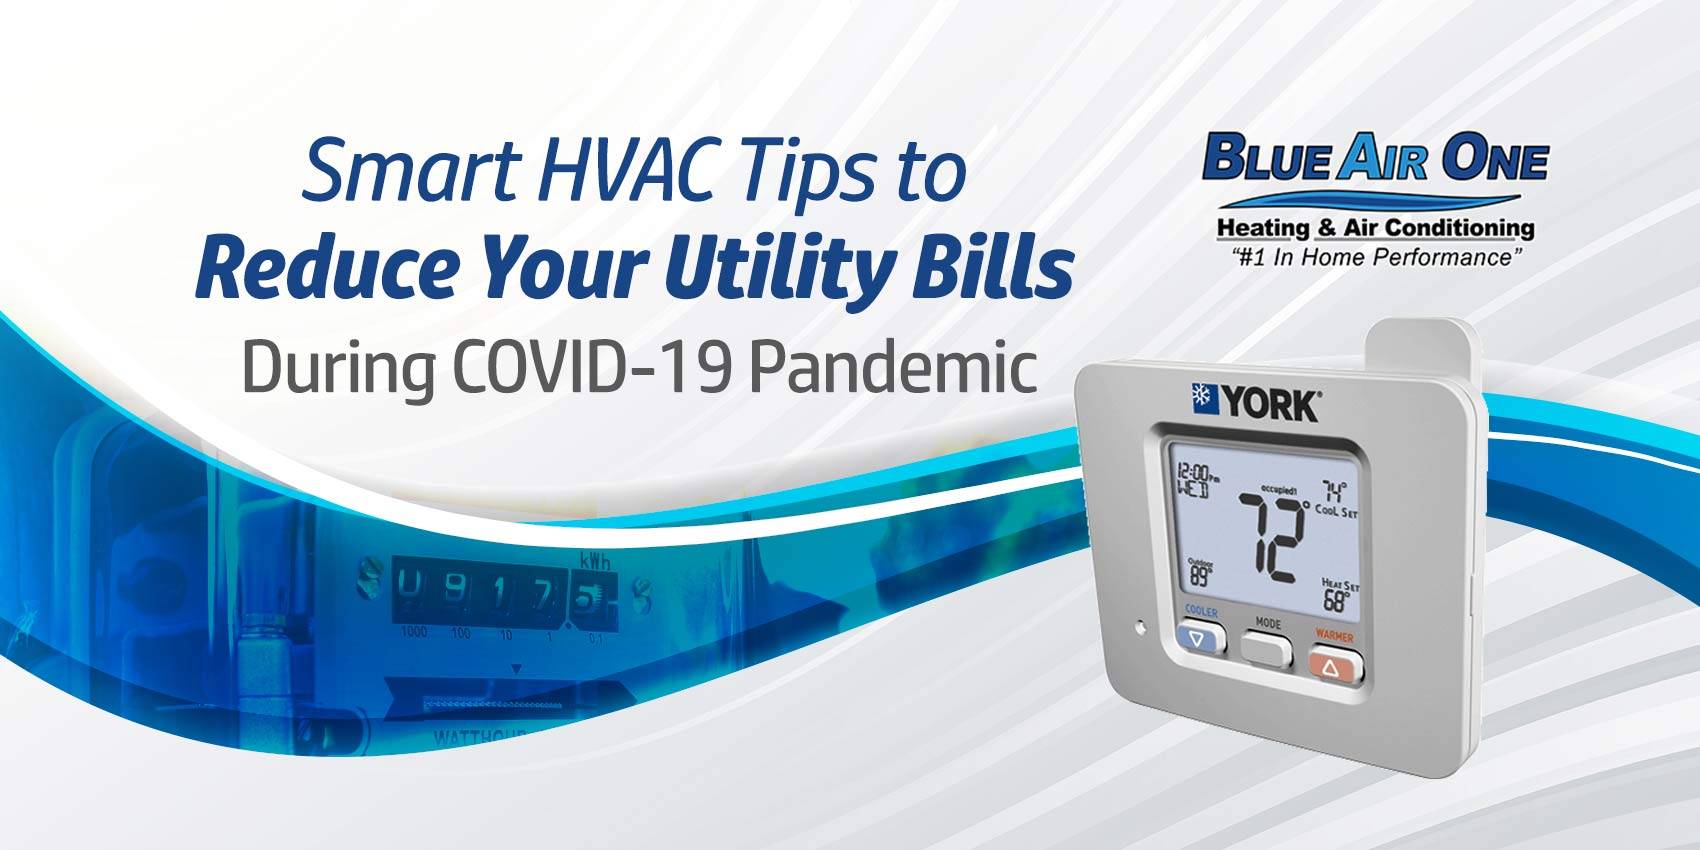 Smart HVAC Tips to Reduce Your Utility Bills During the COVID-19 Pandemic